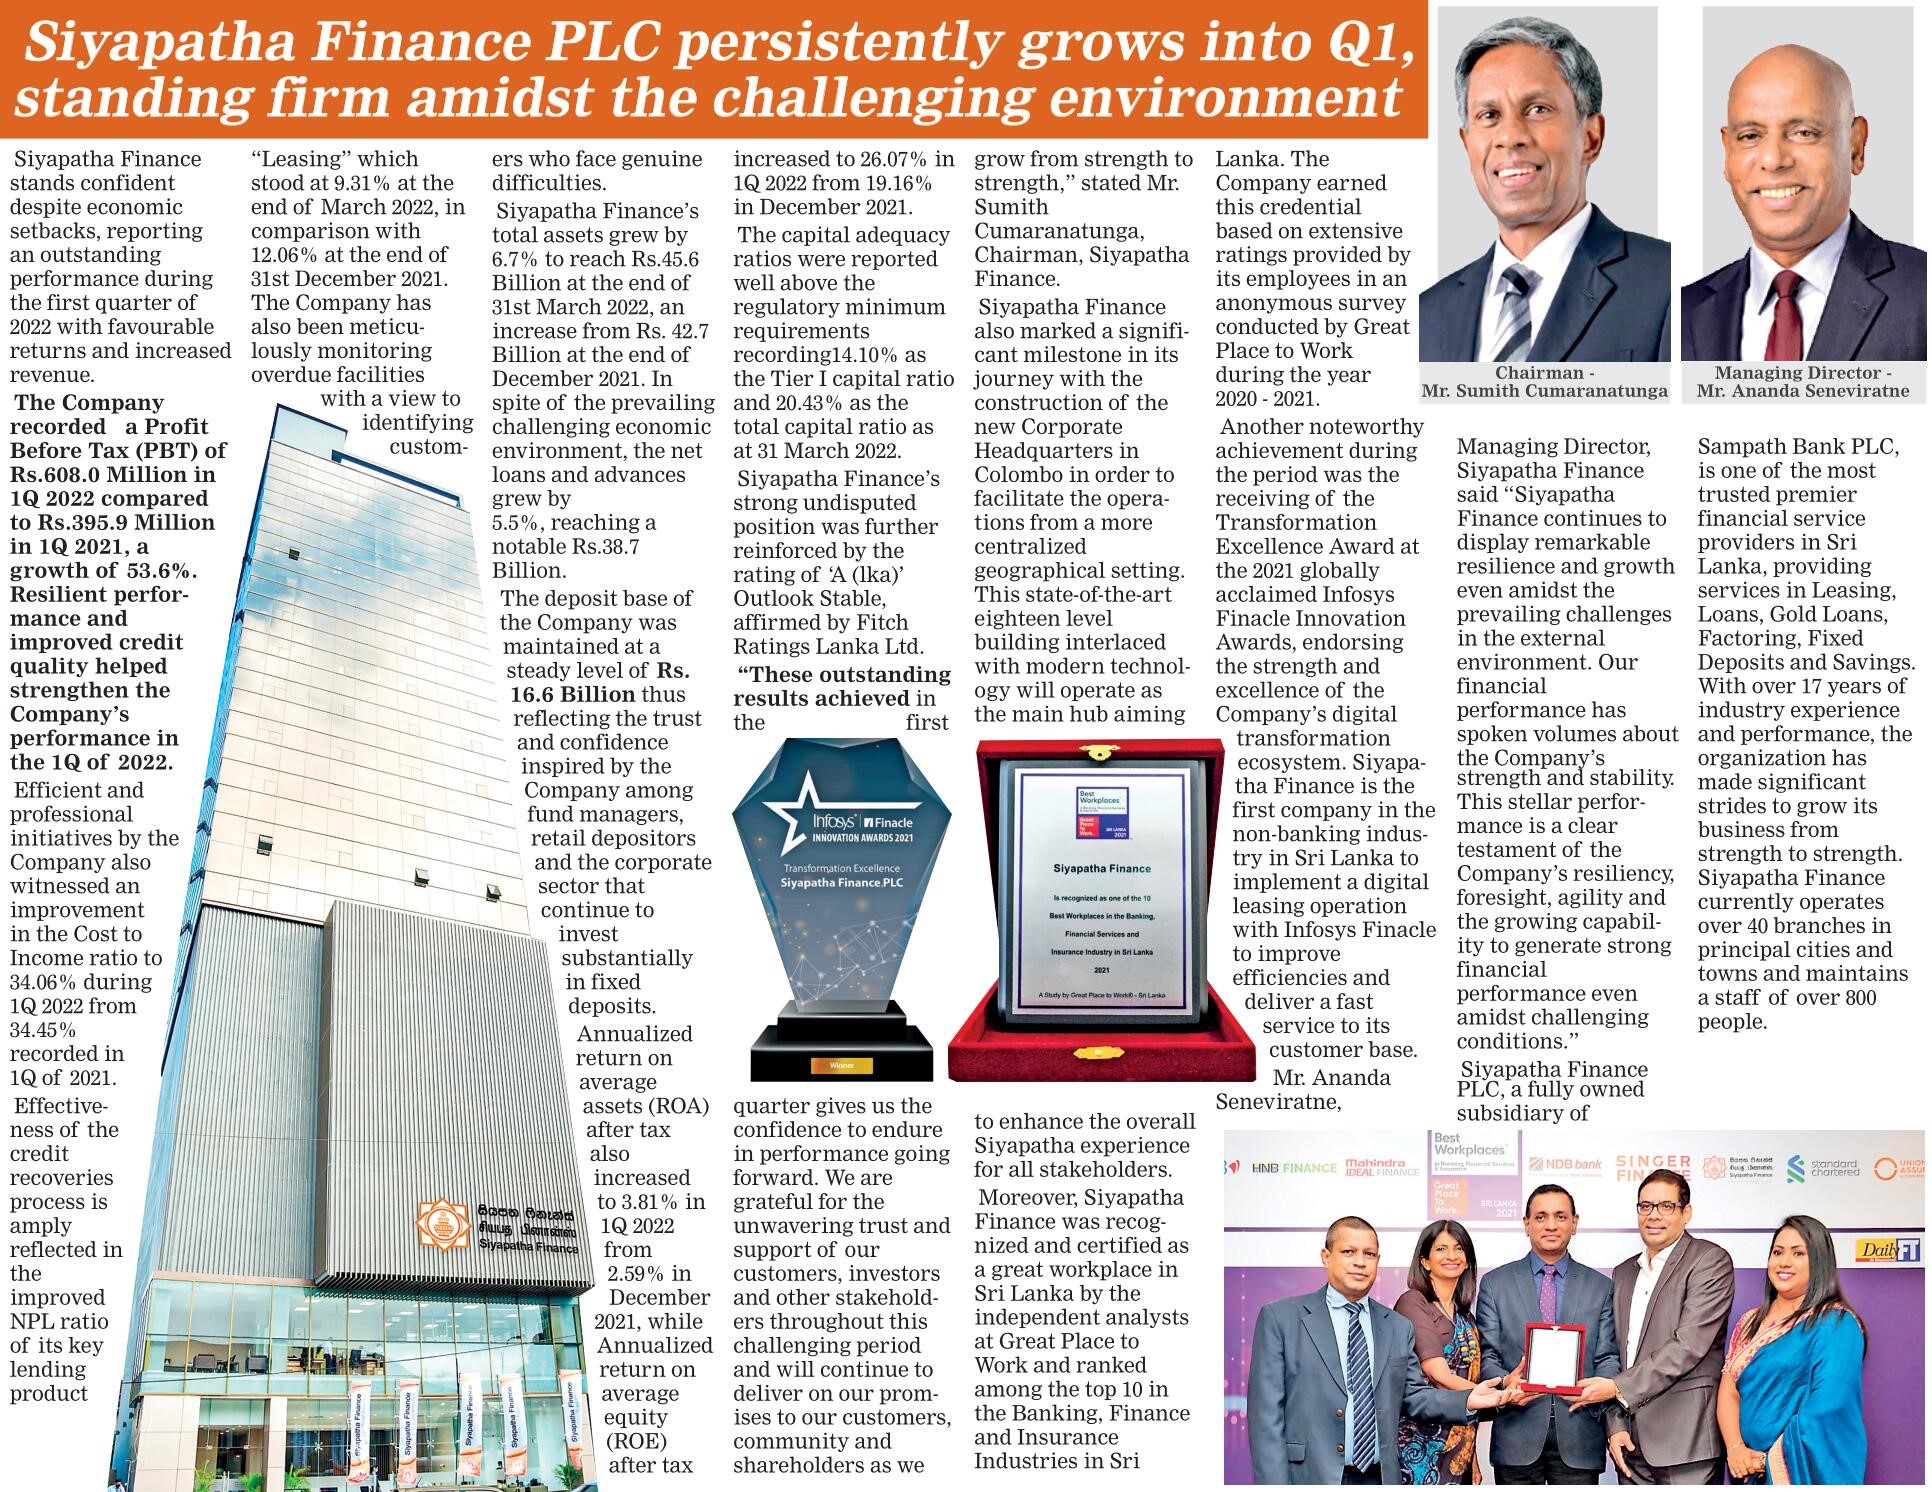 Siyapatha Finance PLC persistently grows into Q1, standing firm amidst the challenging environment